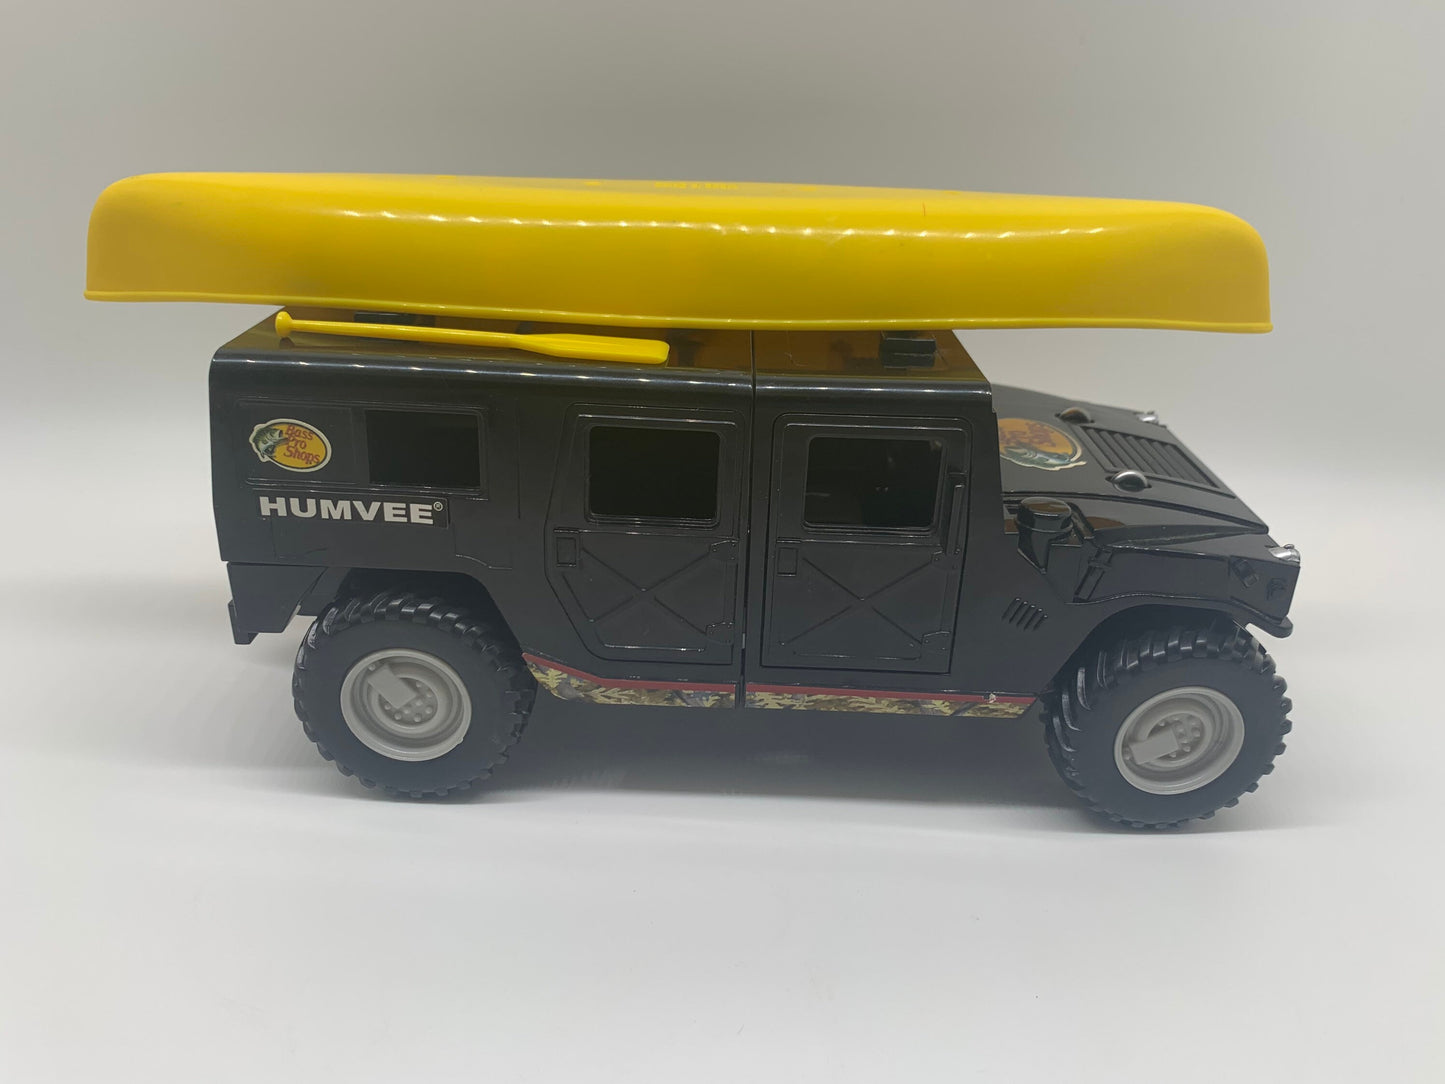 Bass Pro Shops Humvee and Canoe Collectible 124 Scale Model Toy Car